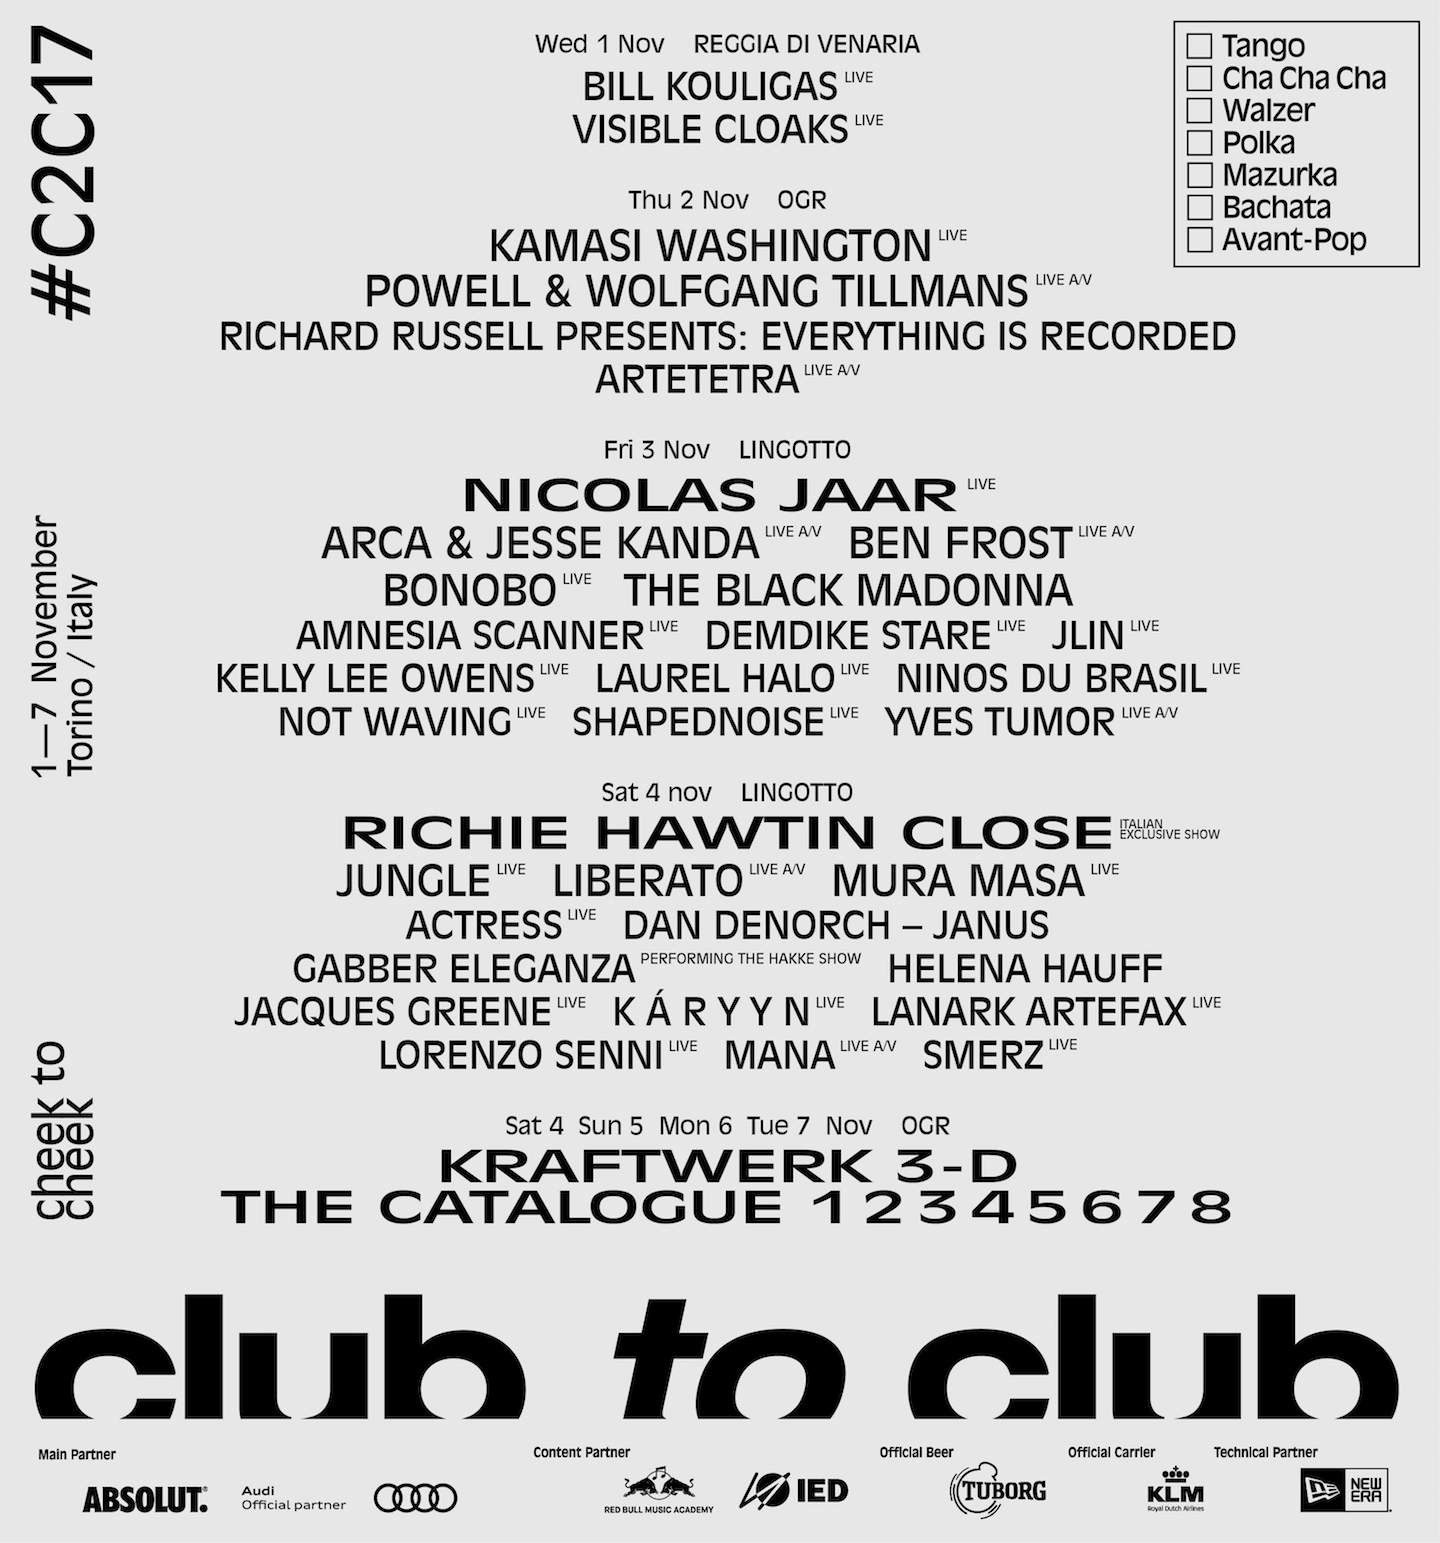 XL's Richard Russell, Helena Hauff join Club To Club 2017 image